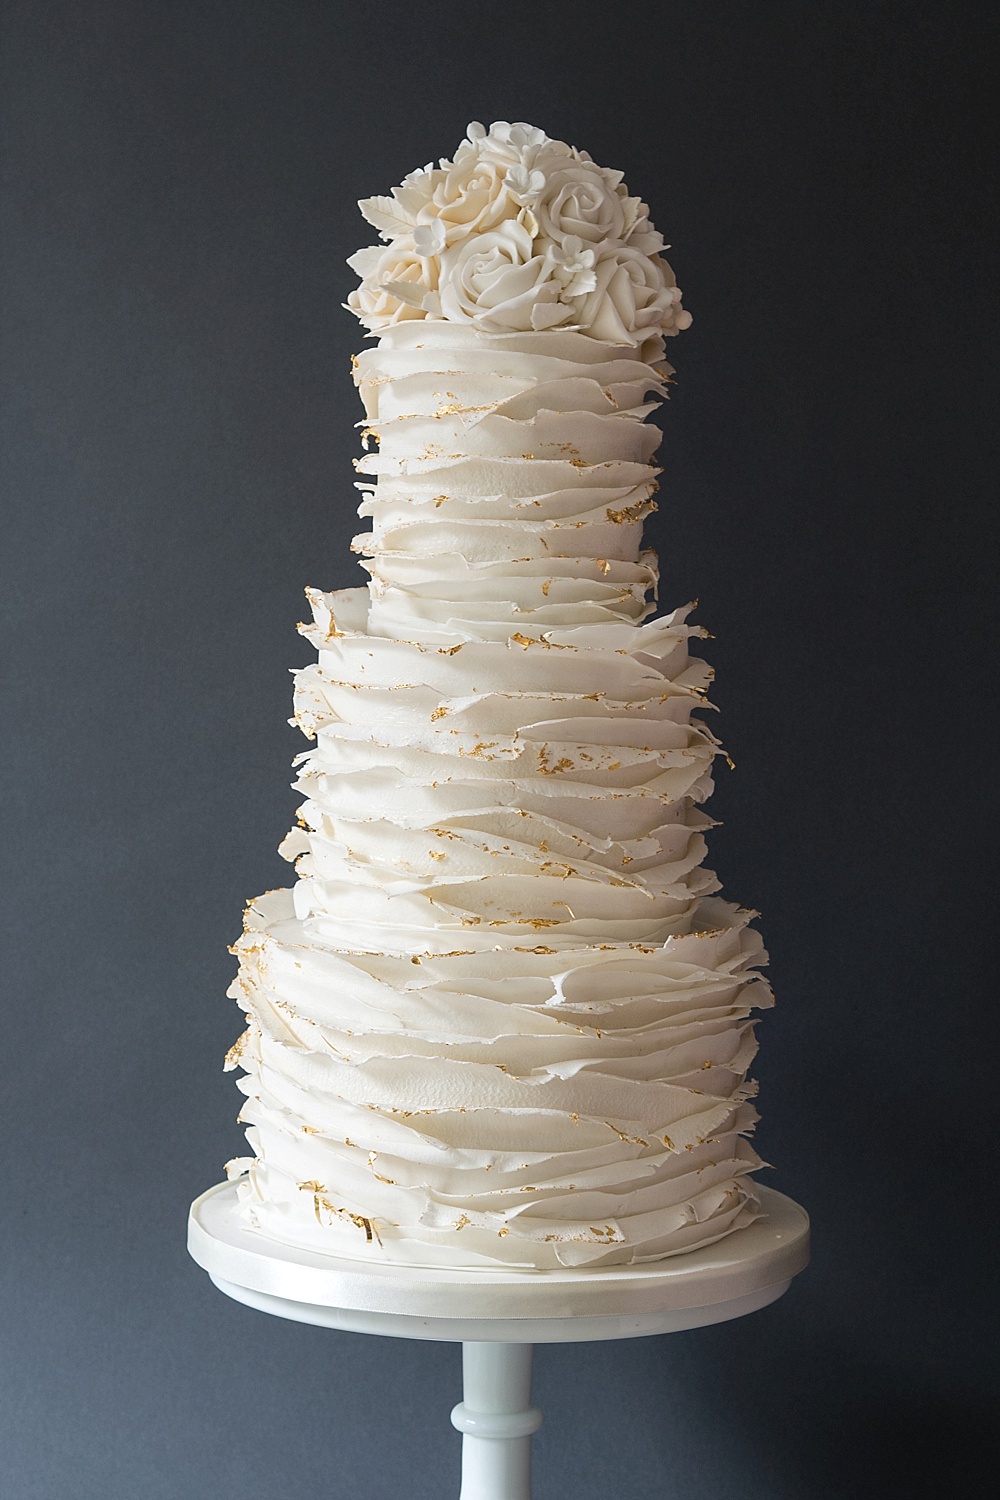 Iced Wedding  Cakes  From Top UK  Wedding  Cake  Makers RMW The 